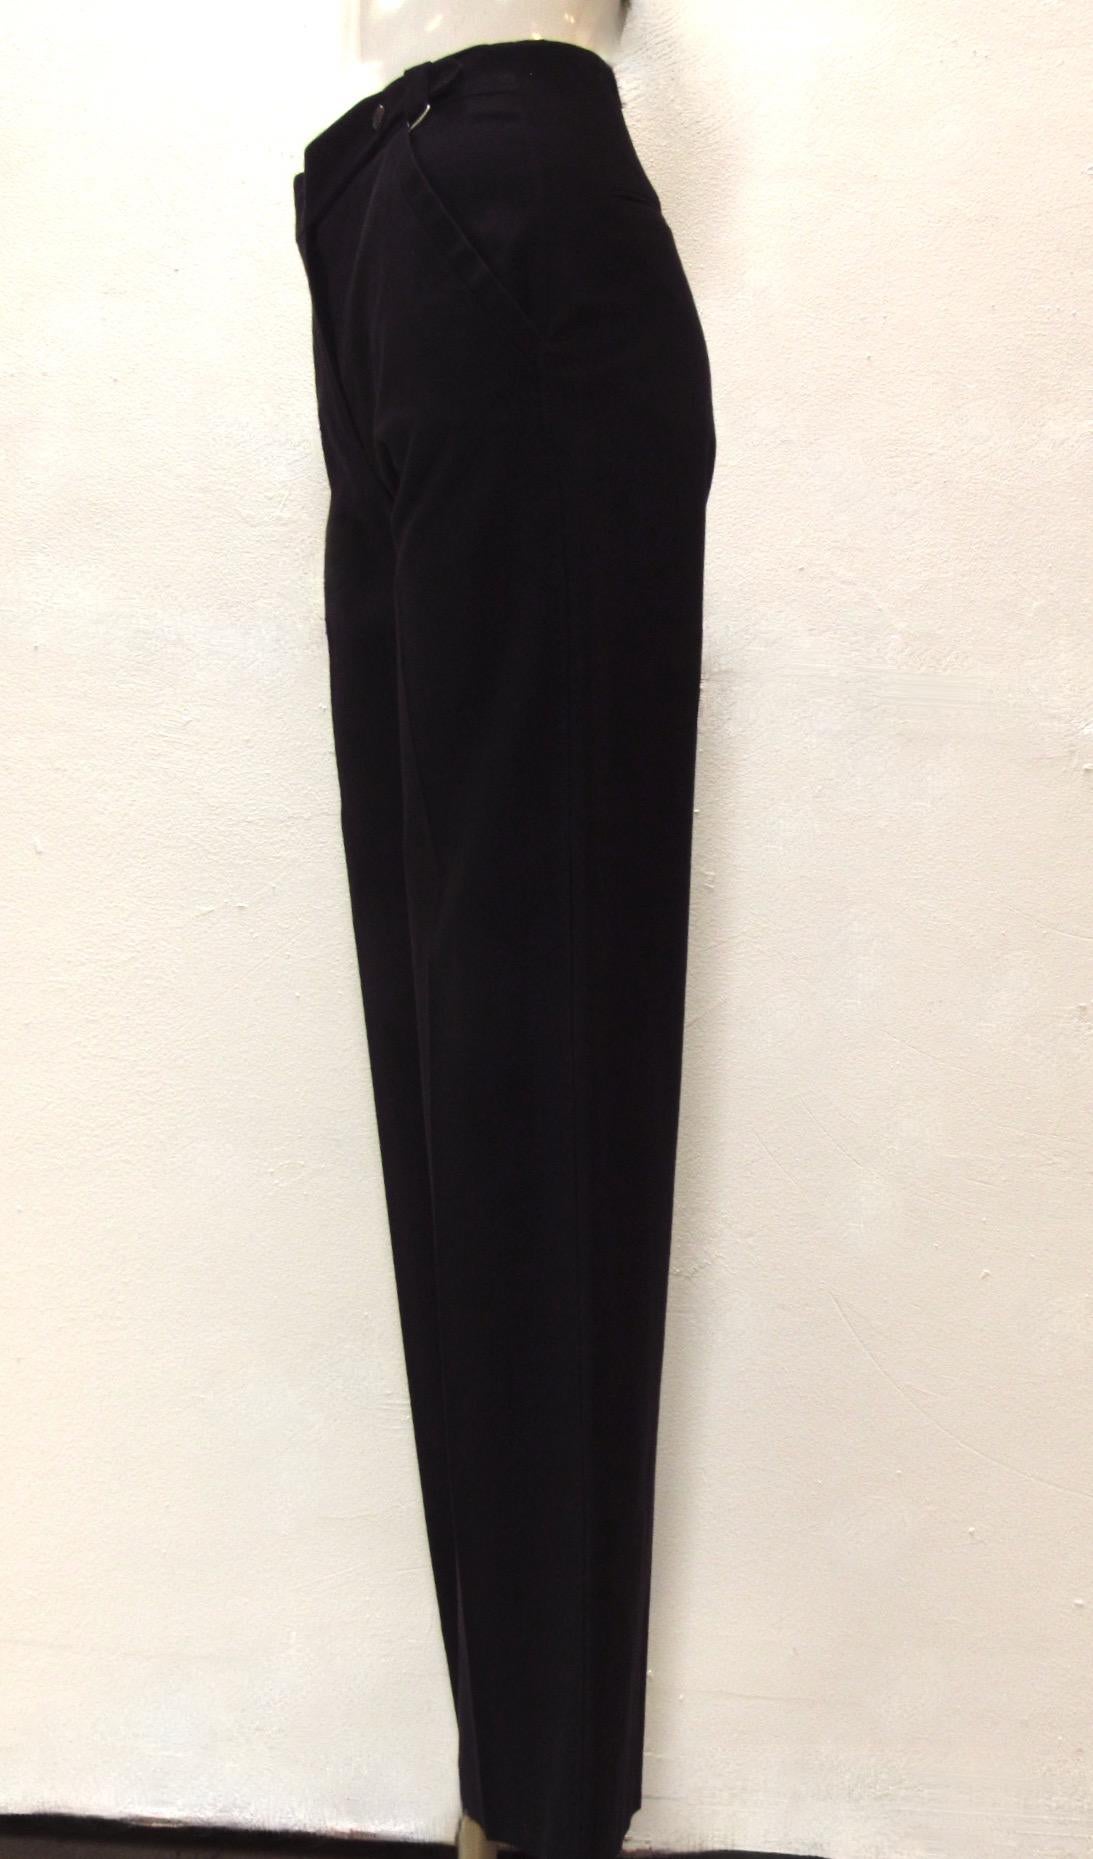 These beautifully textured black straight pants from Maison Martin Margiela are a blend of cotton and rayon. They feature a zip fly, slanted front pockets, and two back pockets. 